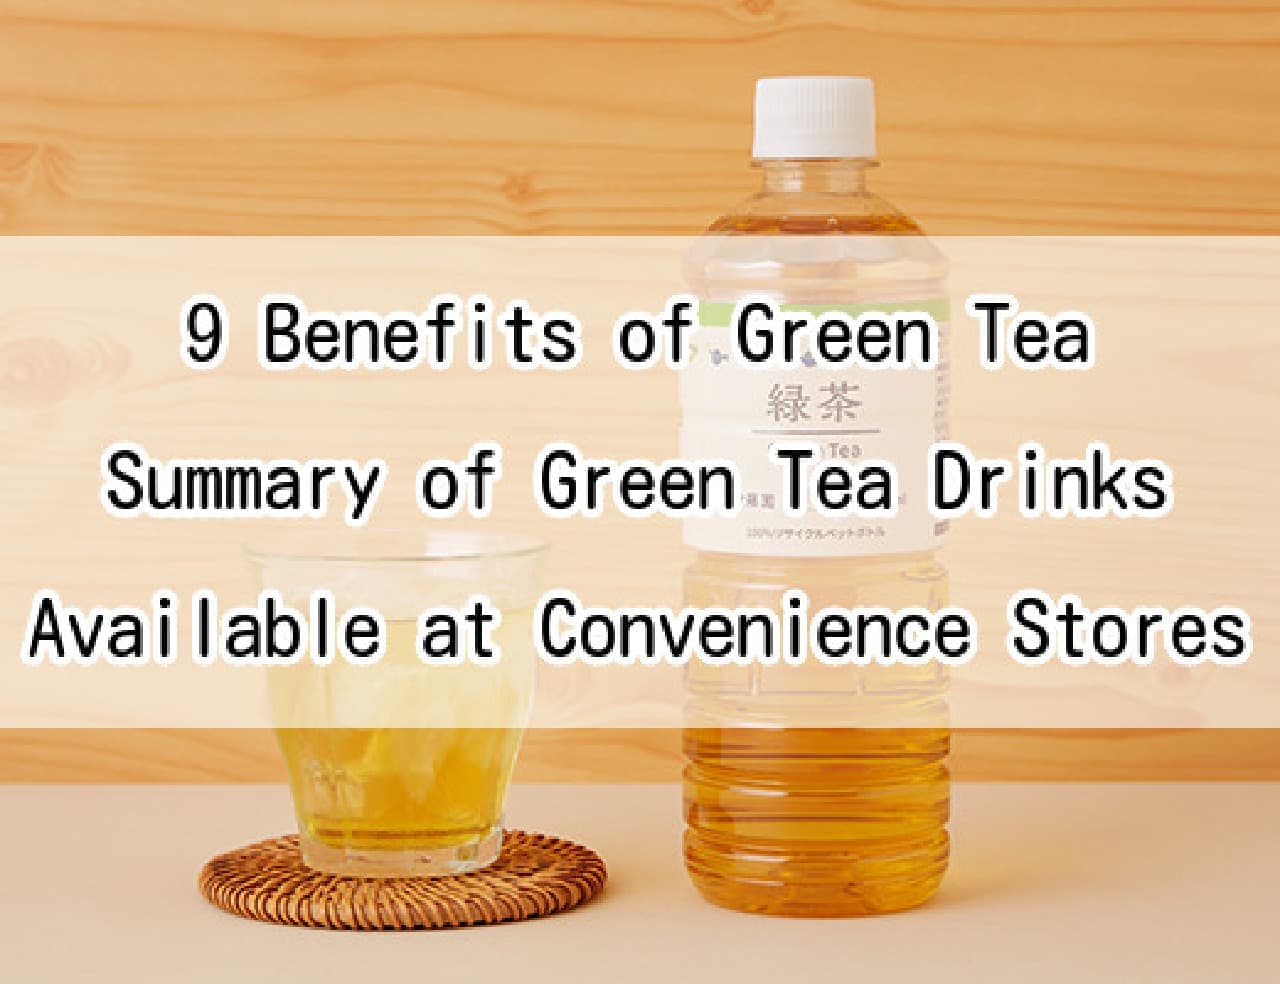 9 Benefits of Green Tea and Green Tea Drinks Available at Convenience Stores Summary